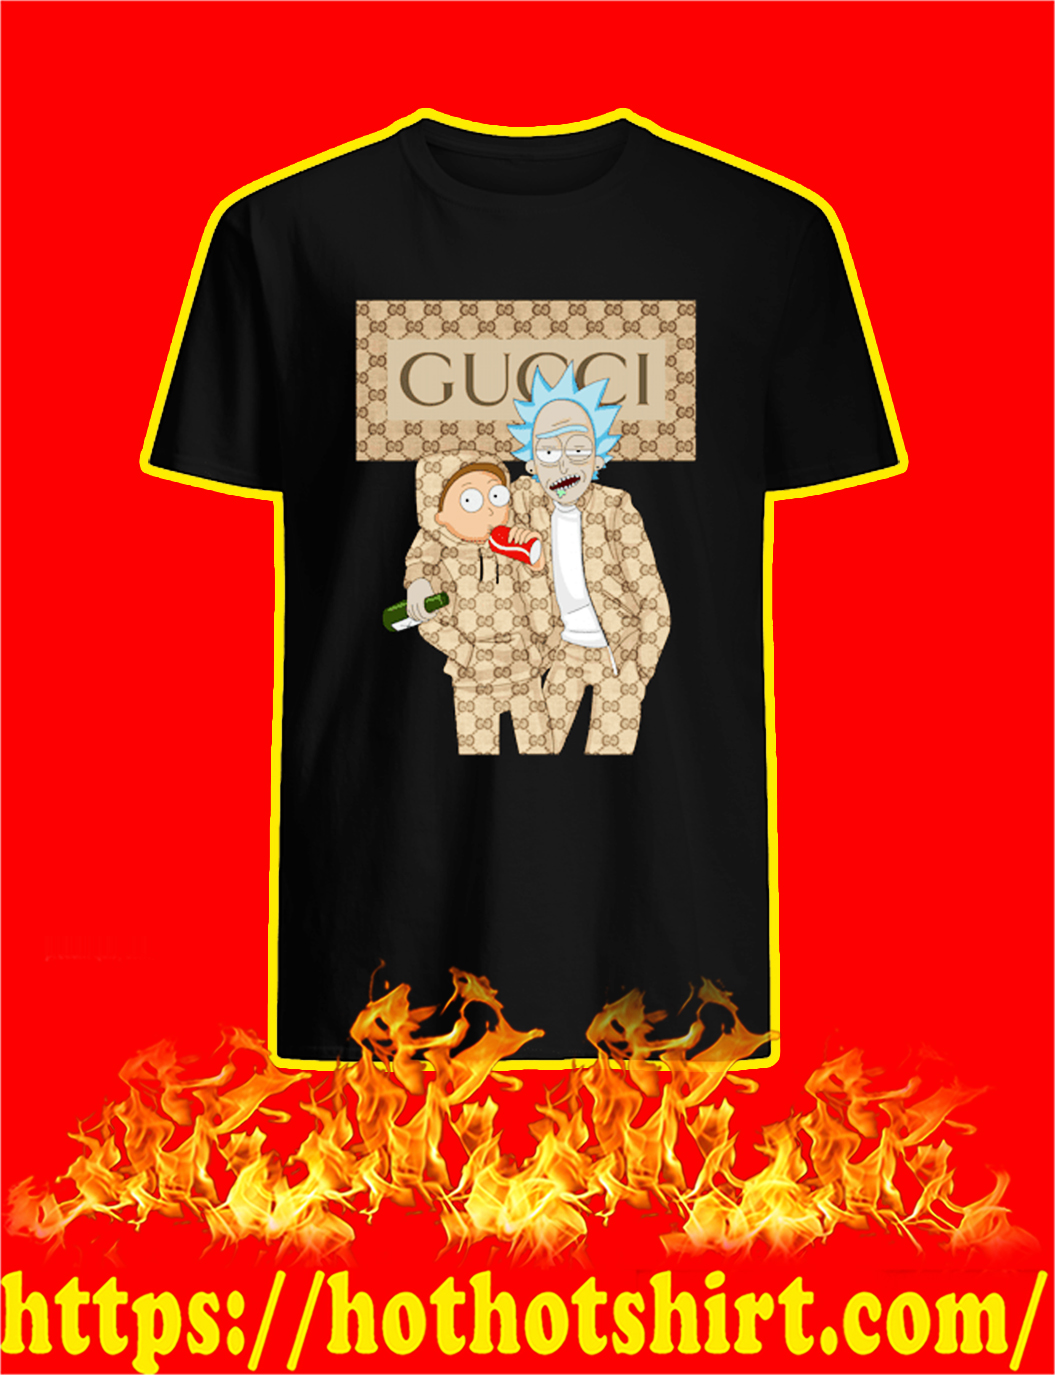 Gucci Rick and Morty shirt and longsleeve tee